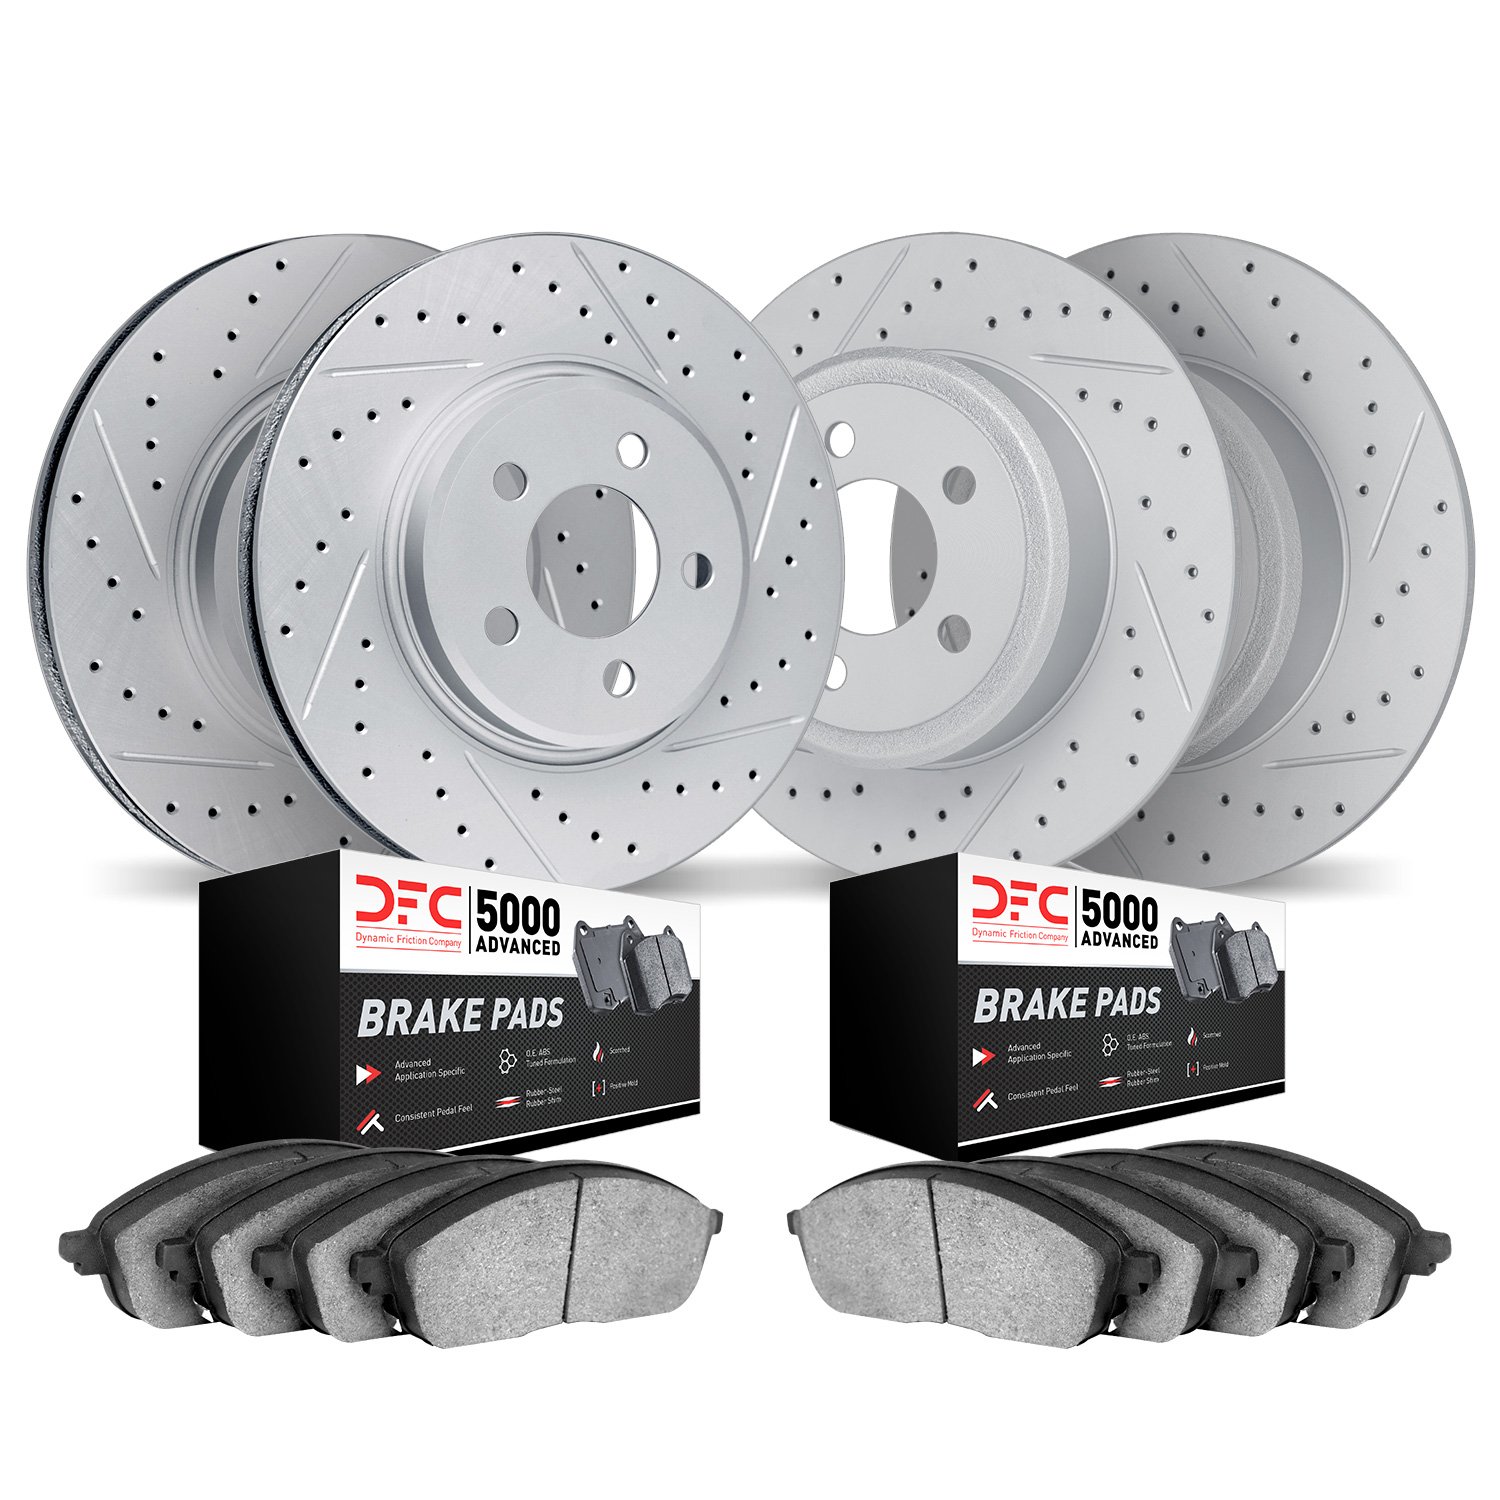 2504-13011 Geoperformance Drilled/Slotted Rotors w/5000 Advanced Brake Pads Kit, Fits Select Subaru, Position: Front and Rear